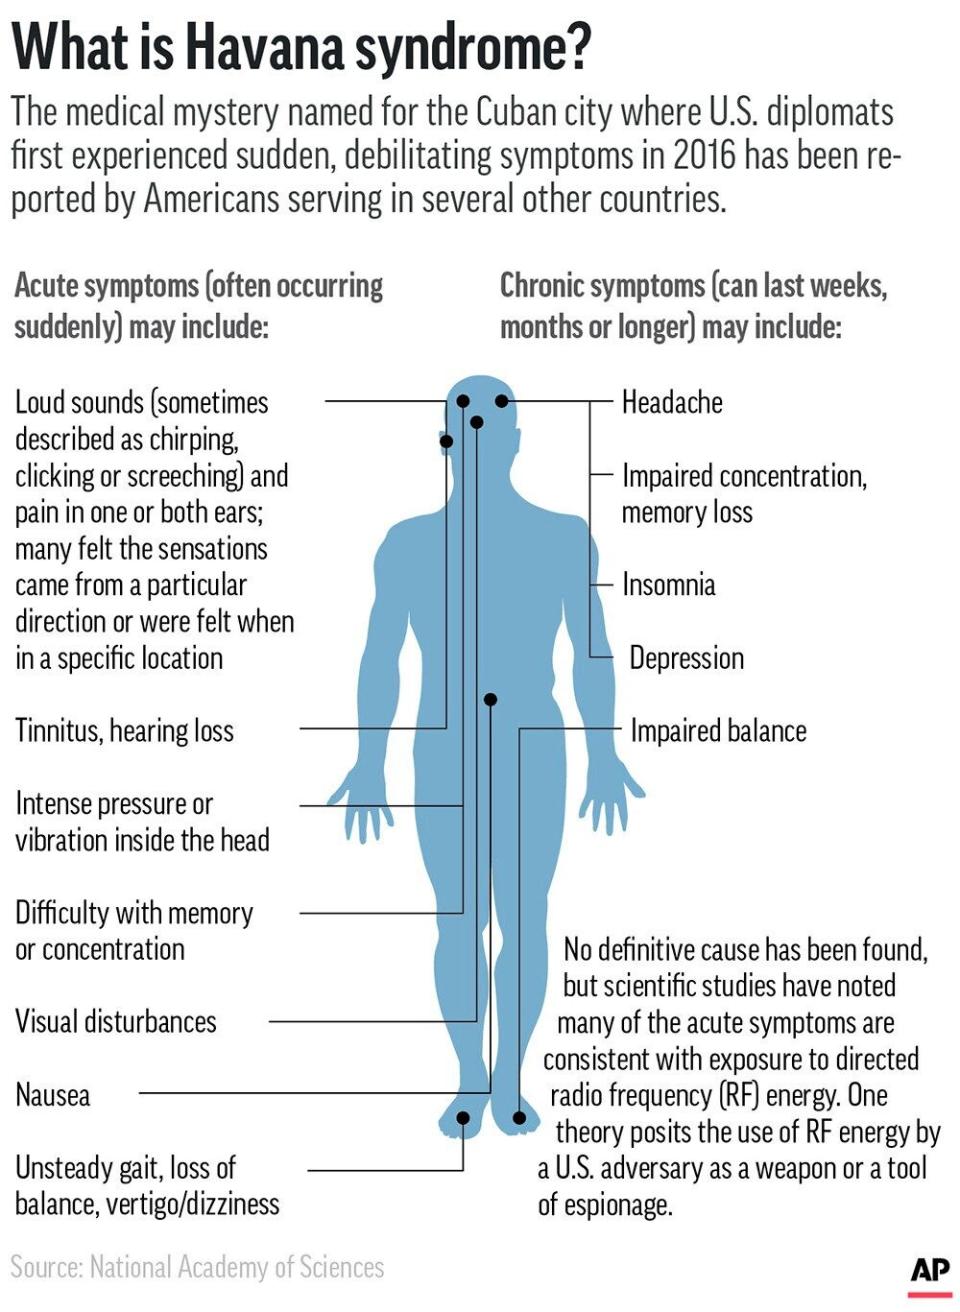 Symptoms associated with Havana syndrome, which has afflicted Americans serving at diplomatic posts in several countries - AP